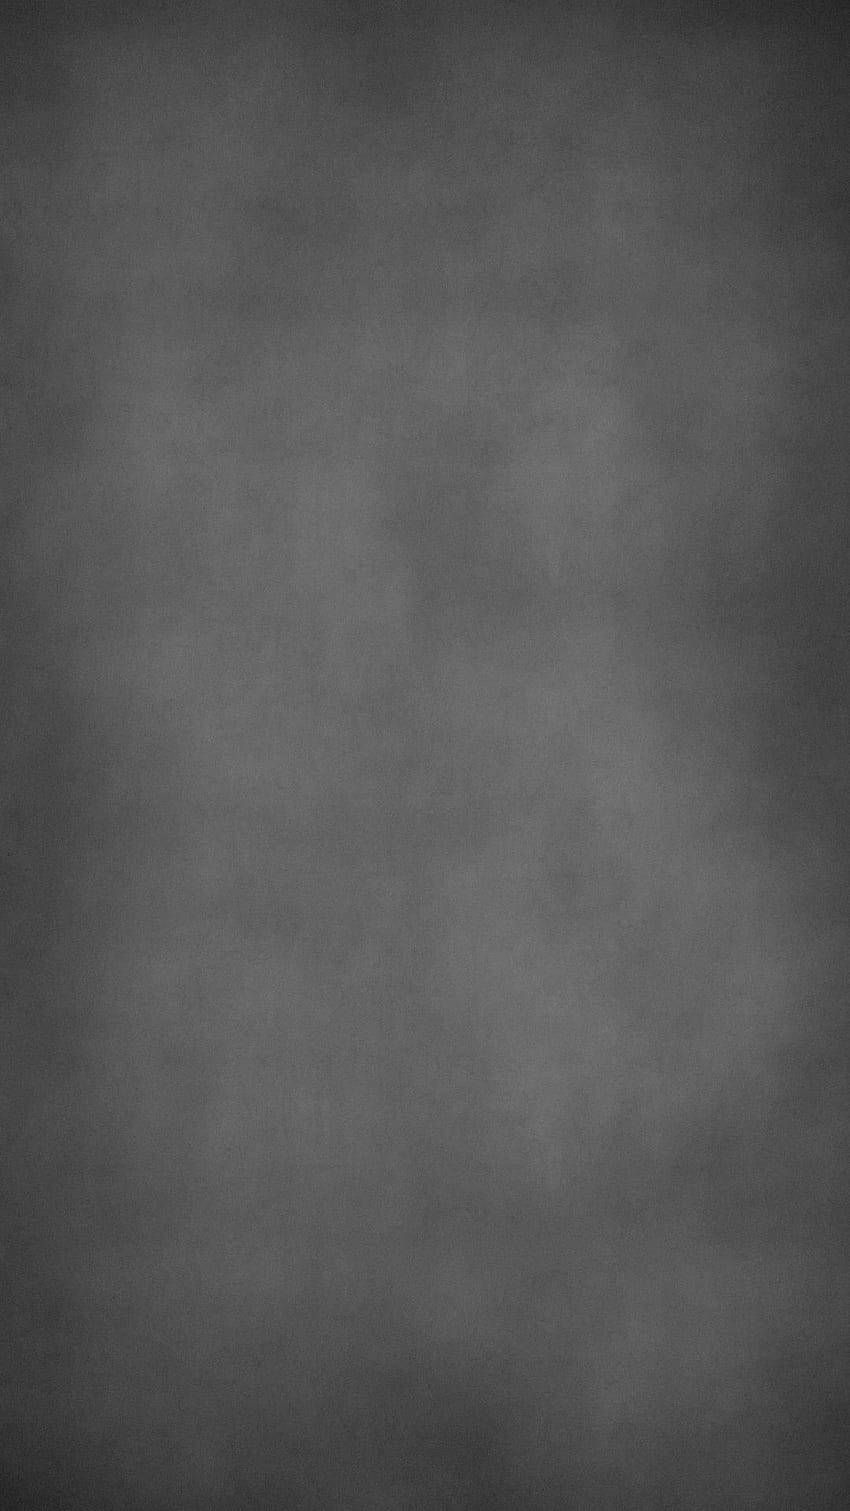 Phone . Phone patterns, Grey iphone, Grey, Gray Ombre HD phone wallpaper